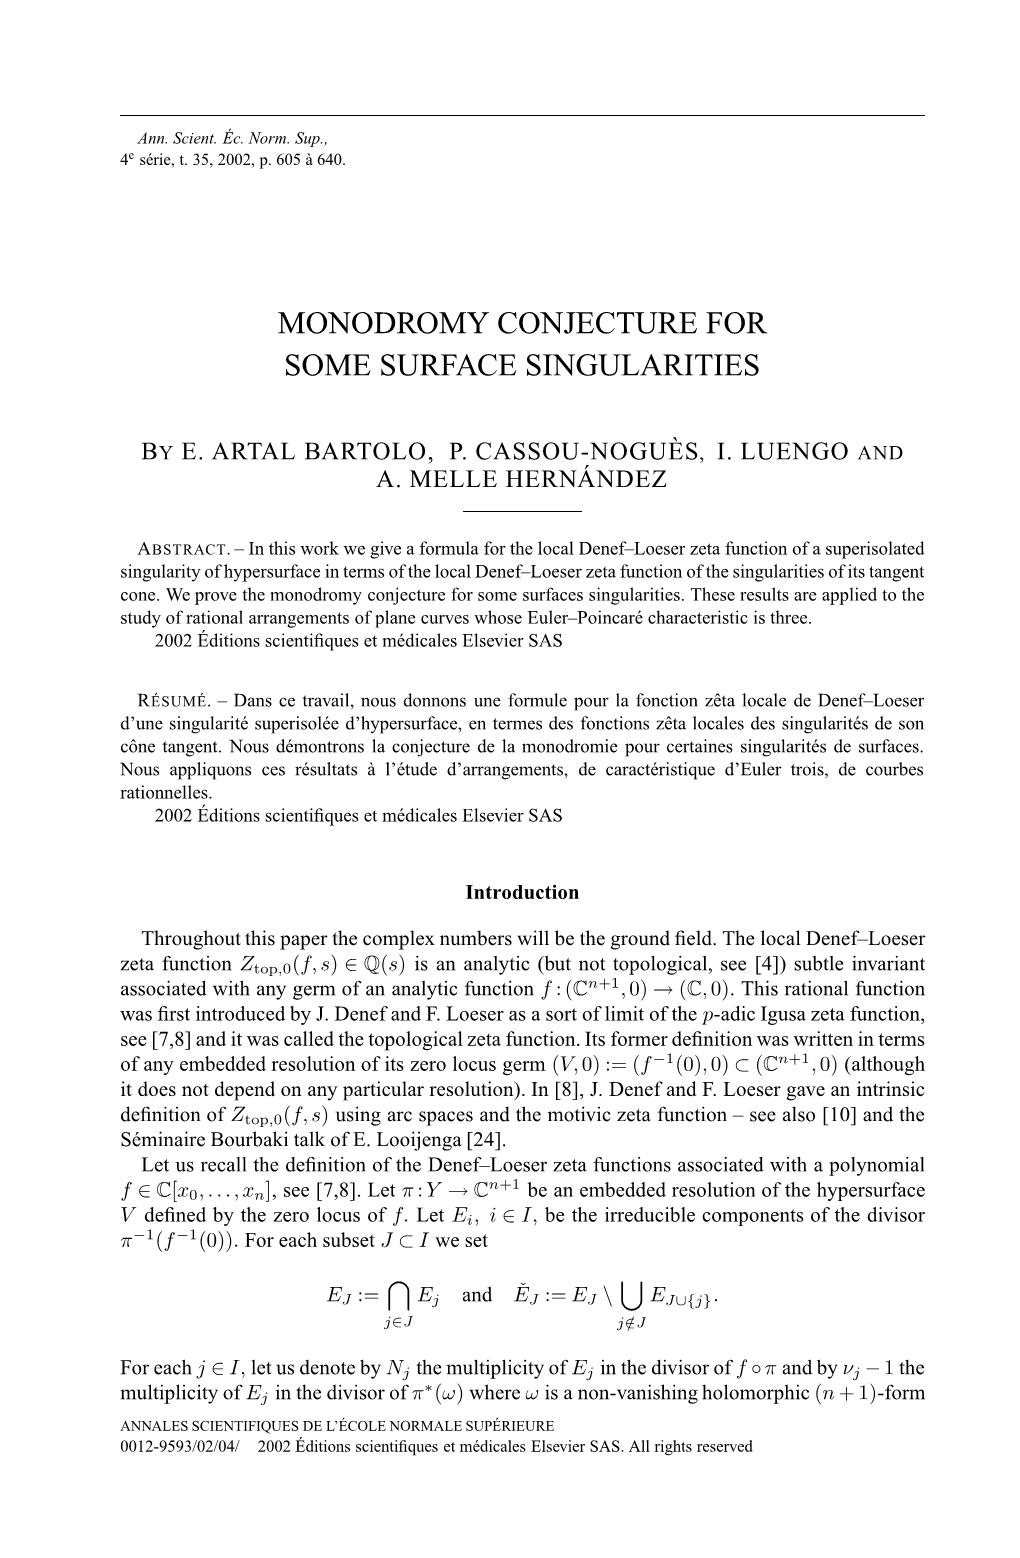 Monodromy Conjecture for Some Surface Singularities